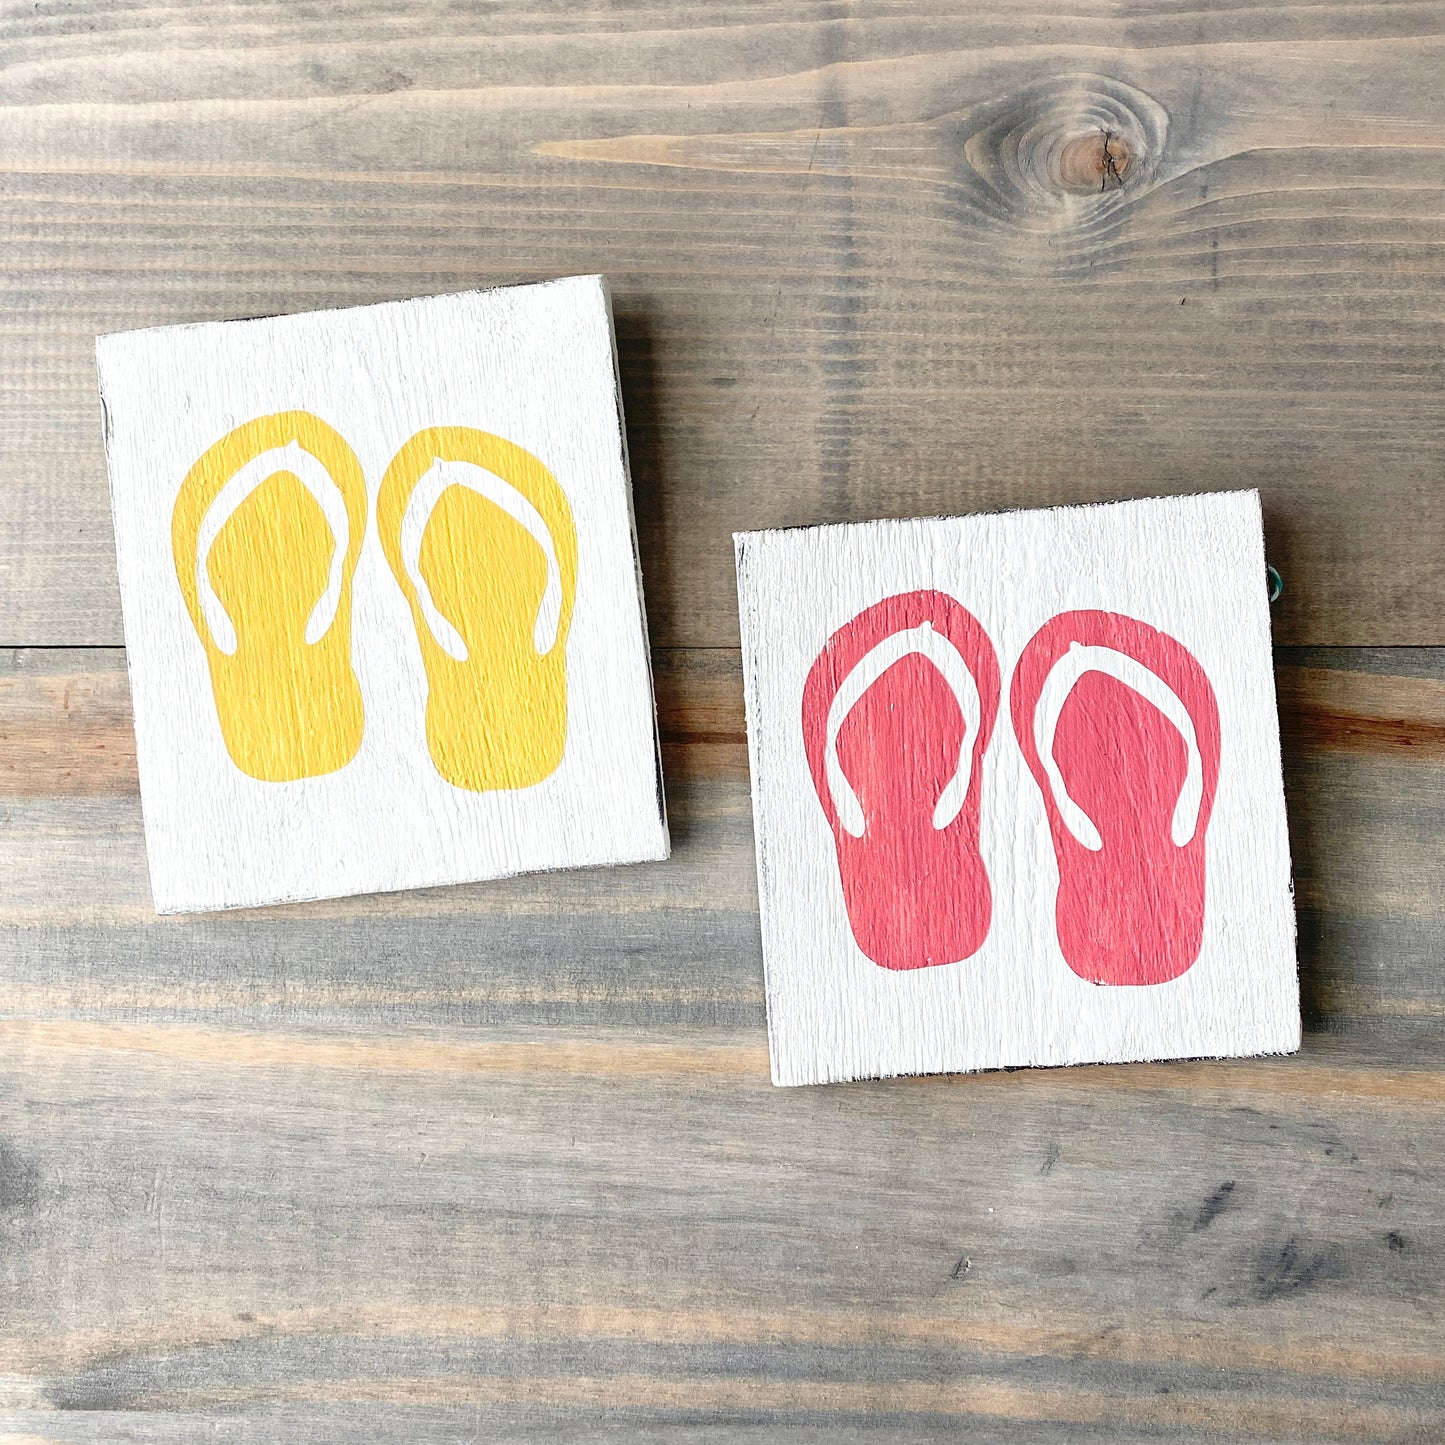 Flip flop wood sign, beach house summer sign, coastlal decor in yellow and pink